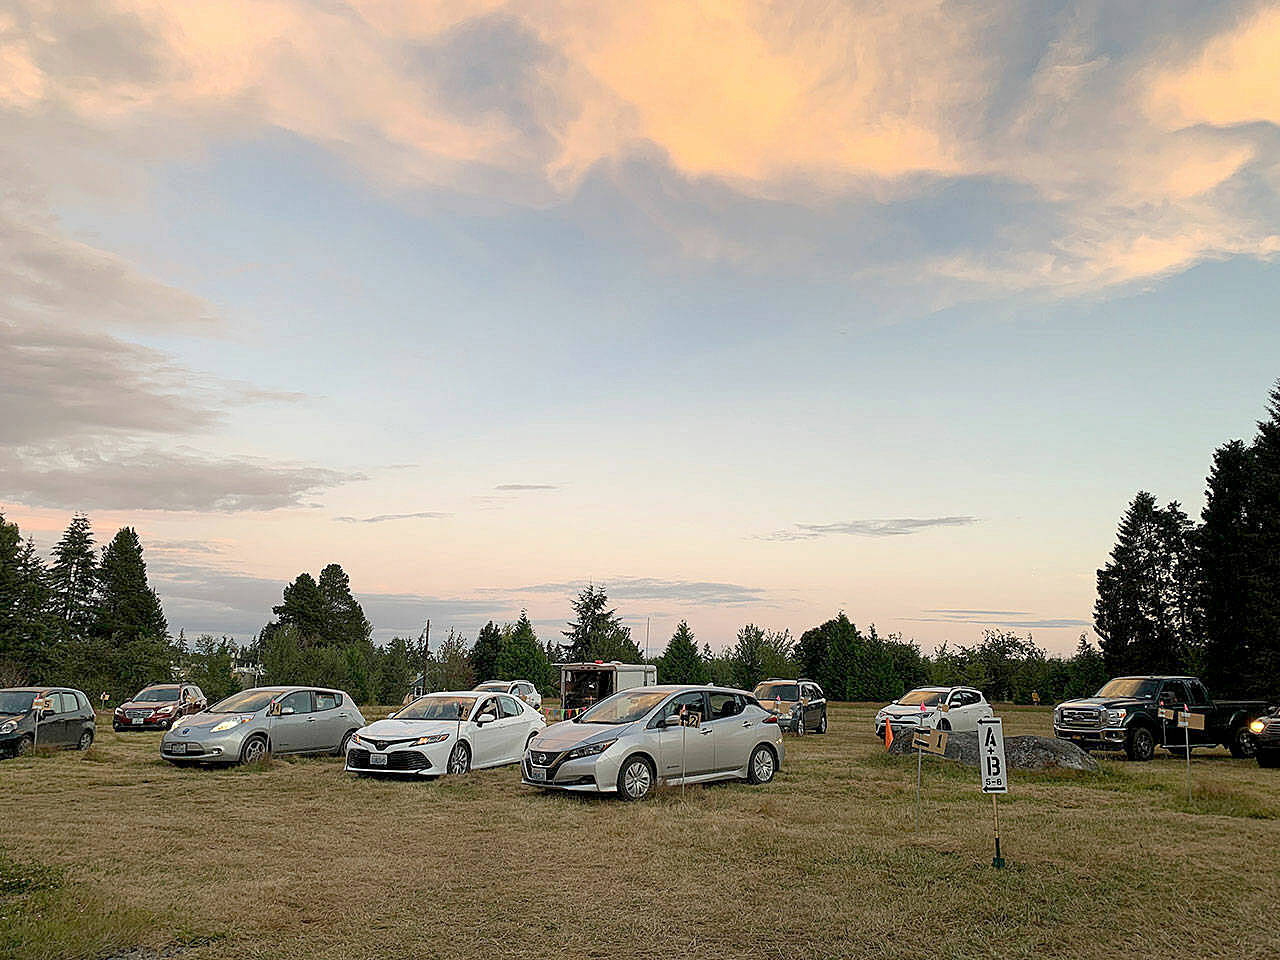 (Max Sarkowsky Photo) Summer movies, under the stars, are back again at Vashon’s Night Light Drive-in, located at Open Space for Arts & Community.